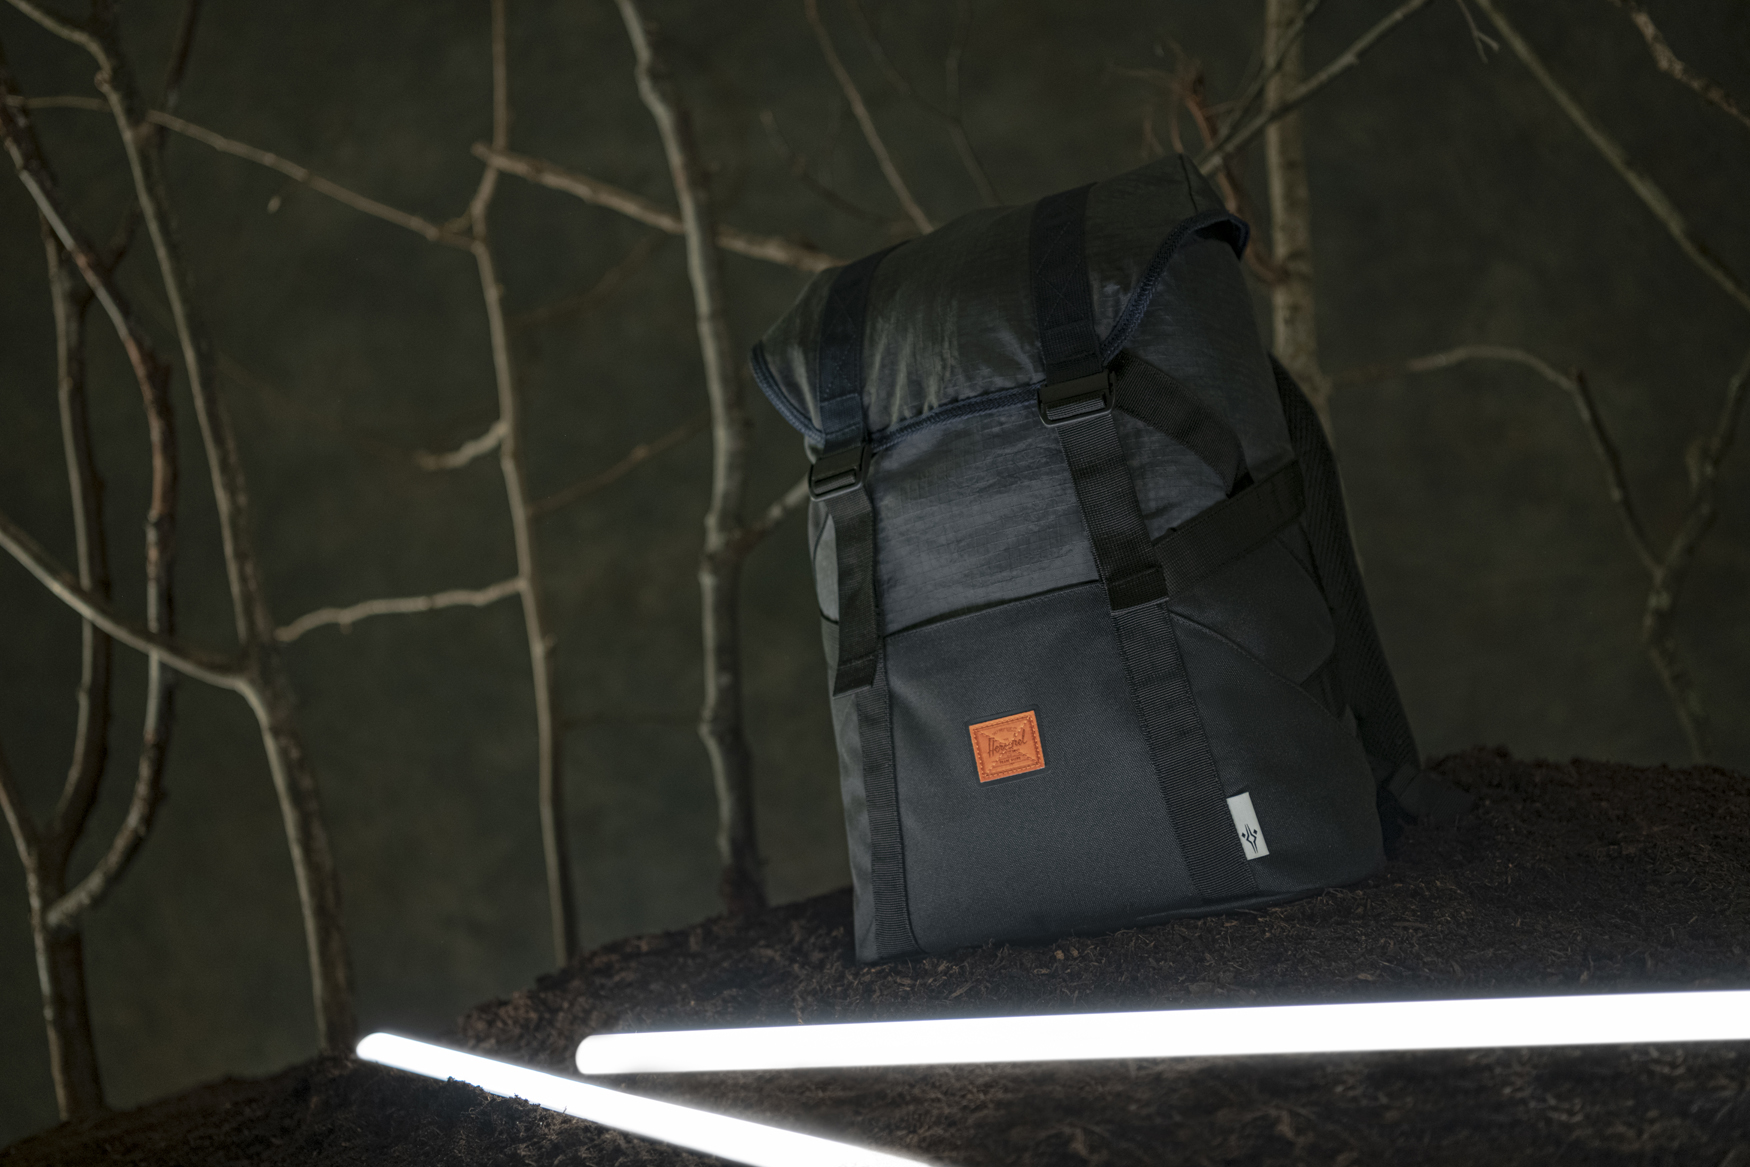 Ripstop fabric with webbing strap details